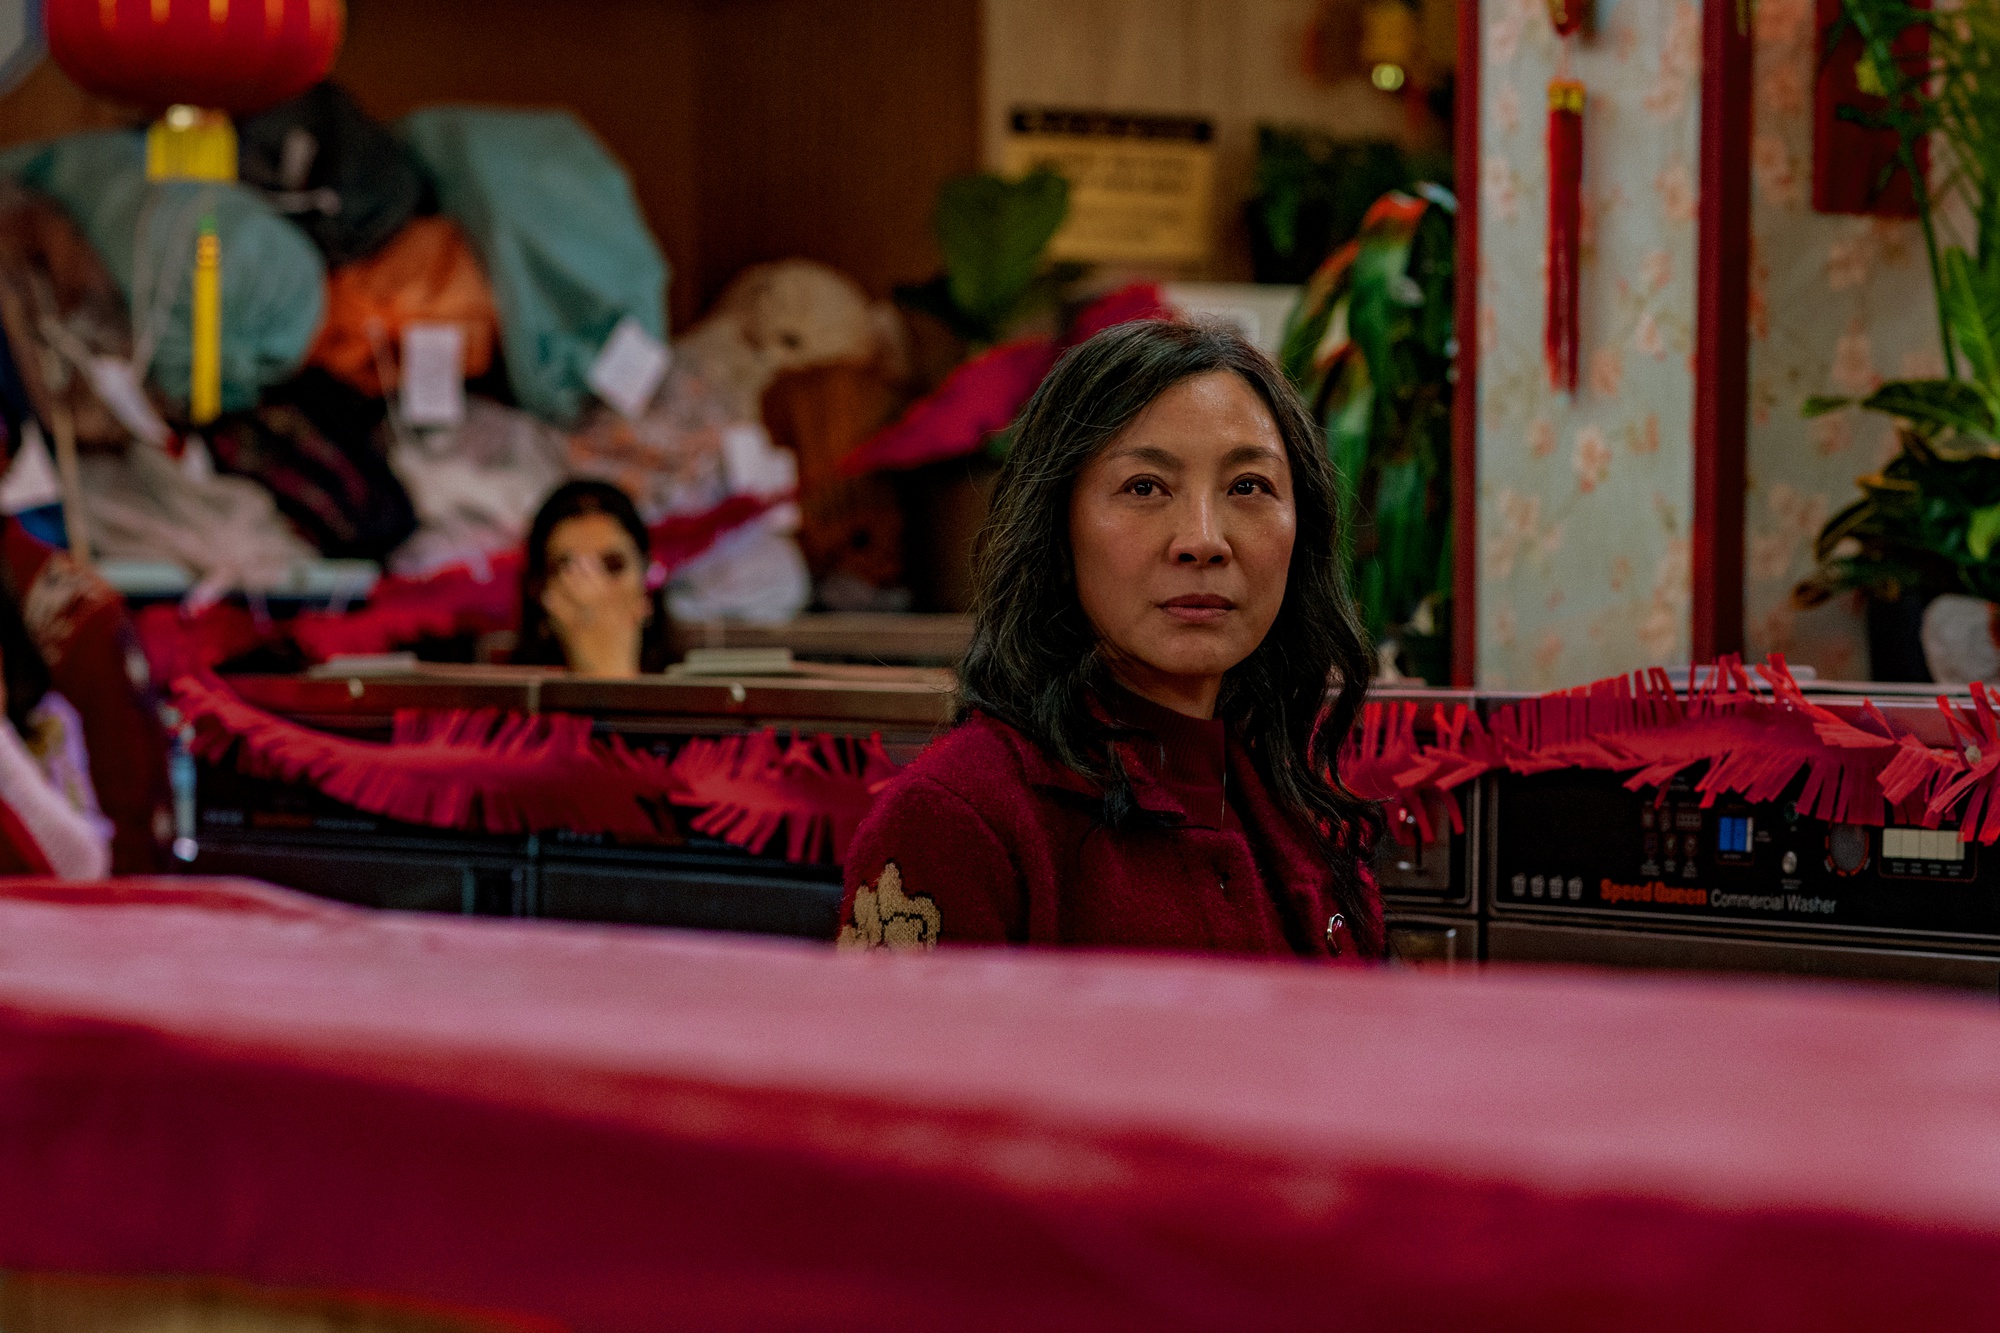 Evelyn (Michelle Yeoh) looks up pensively in her laundromat, which is decorated from Lunar New Year.